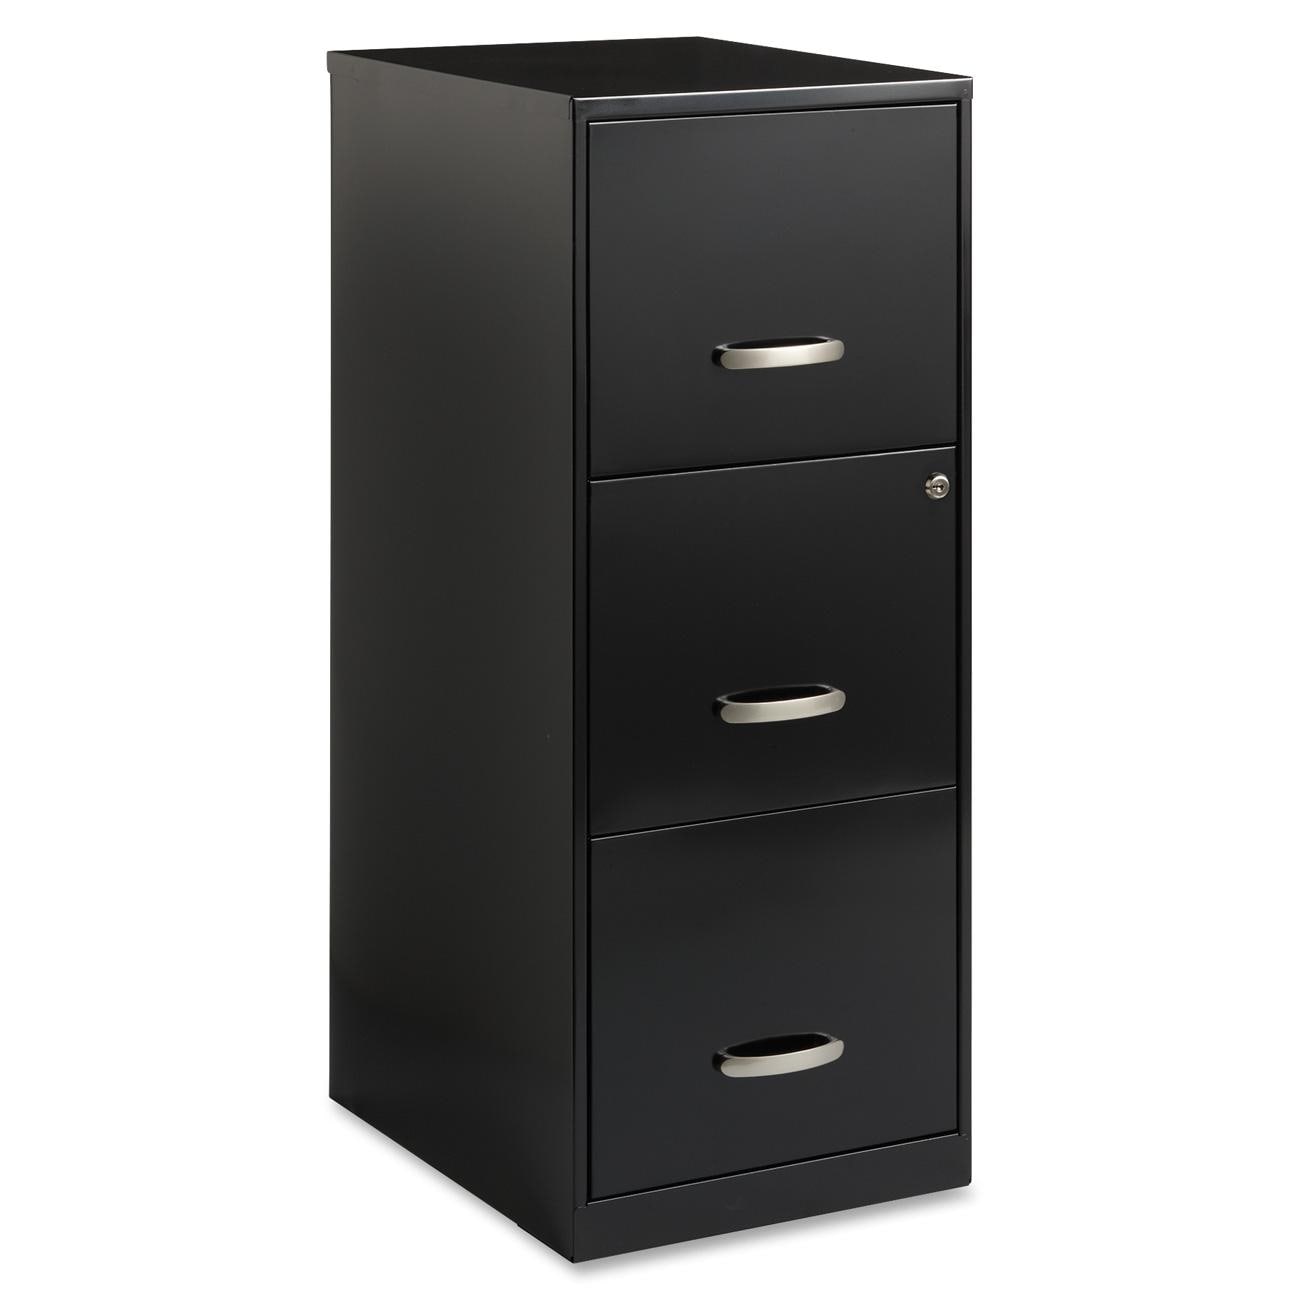 18" 2-Drawer Metal File Storage Cabinet Organizer Home Office Furniture 3 Colors 